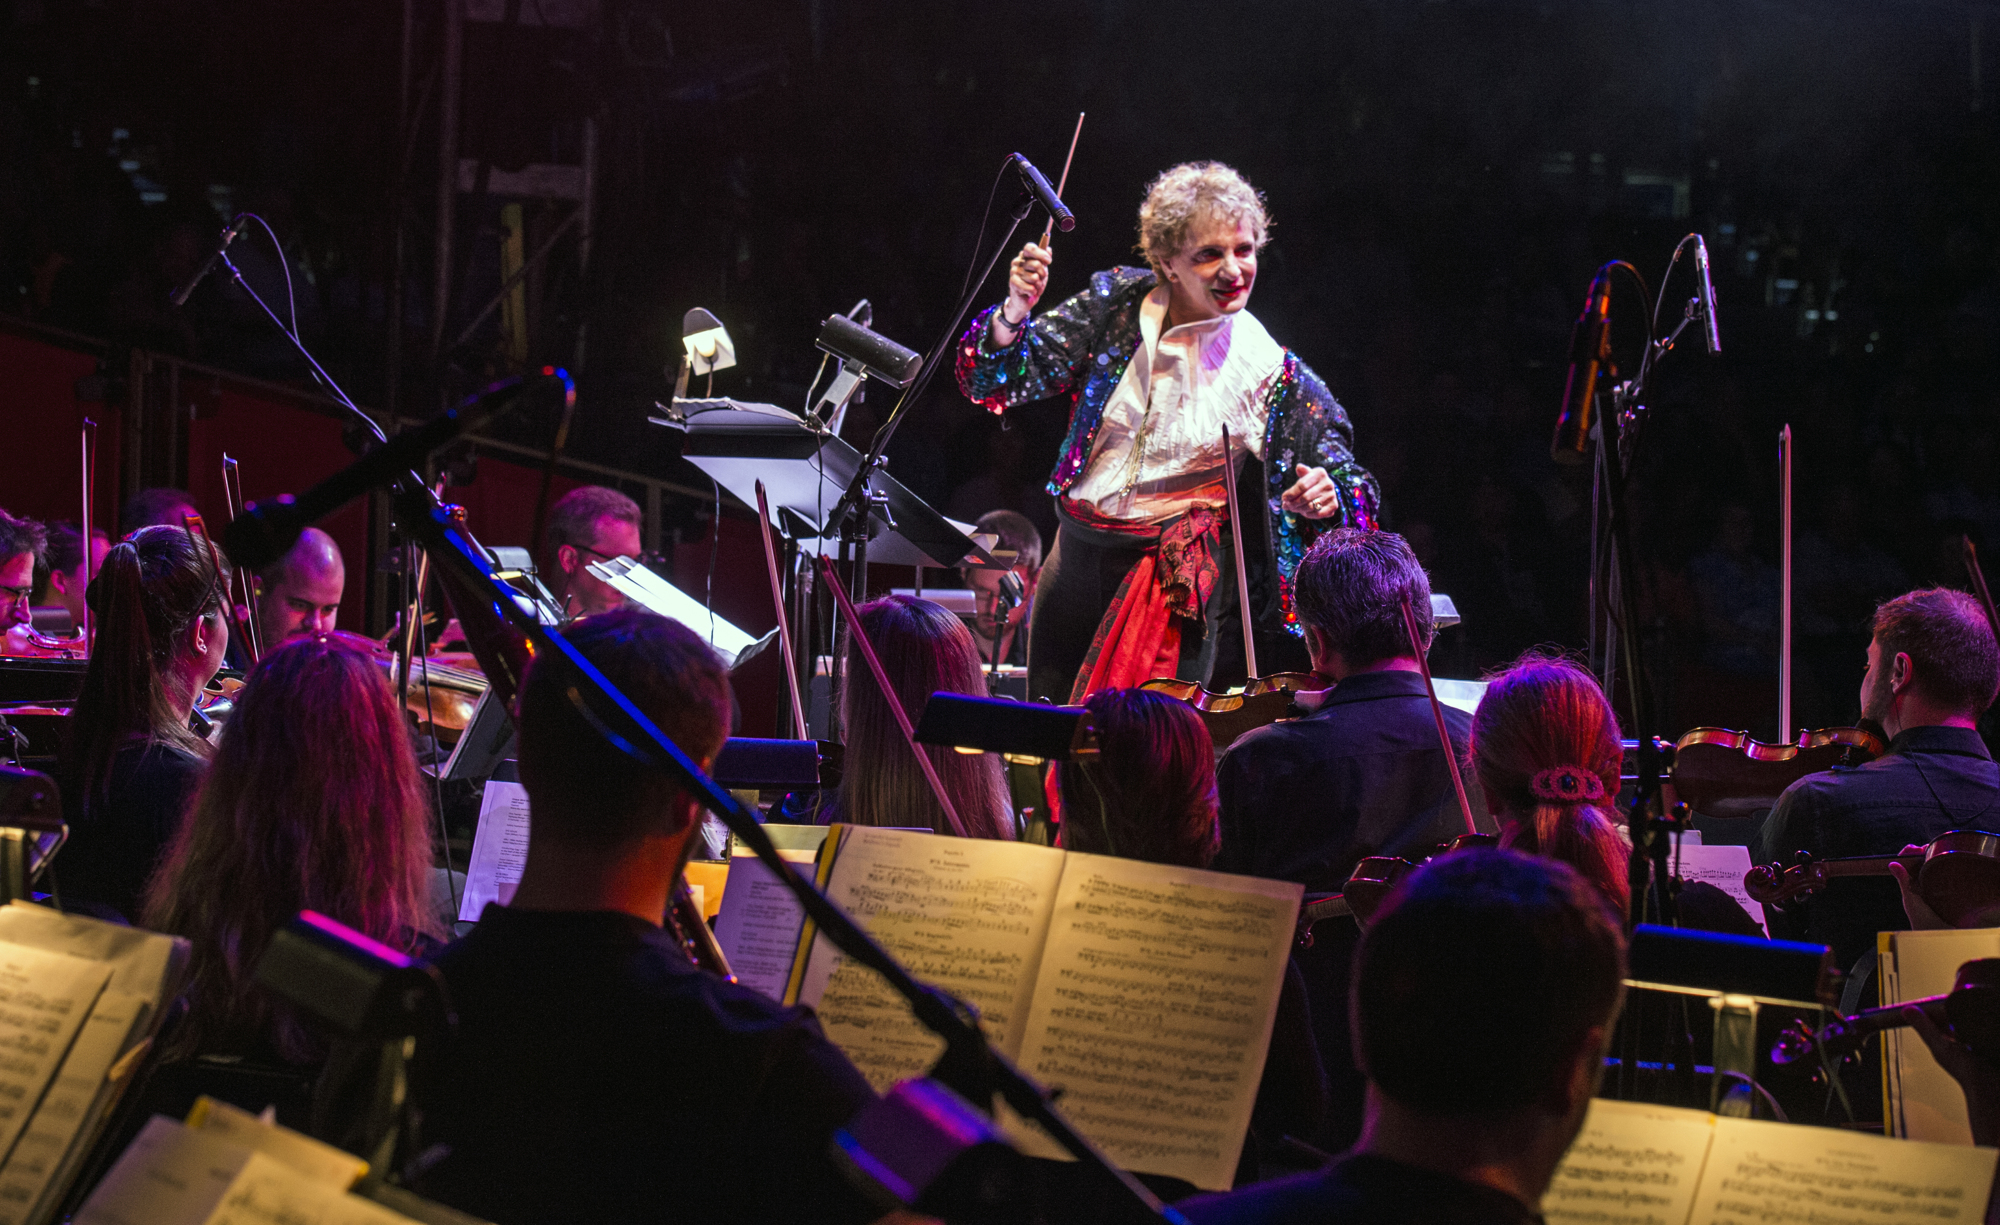 Charlotte Perret guest conducting at the Key Chorale/Circus Sarasota production, Cirque des Voix. Photo by Cliff Roles